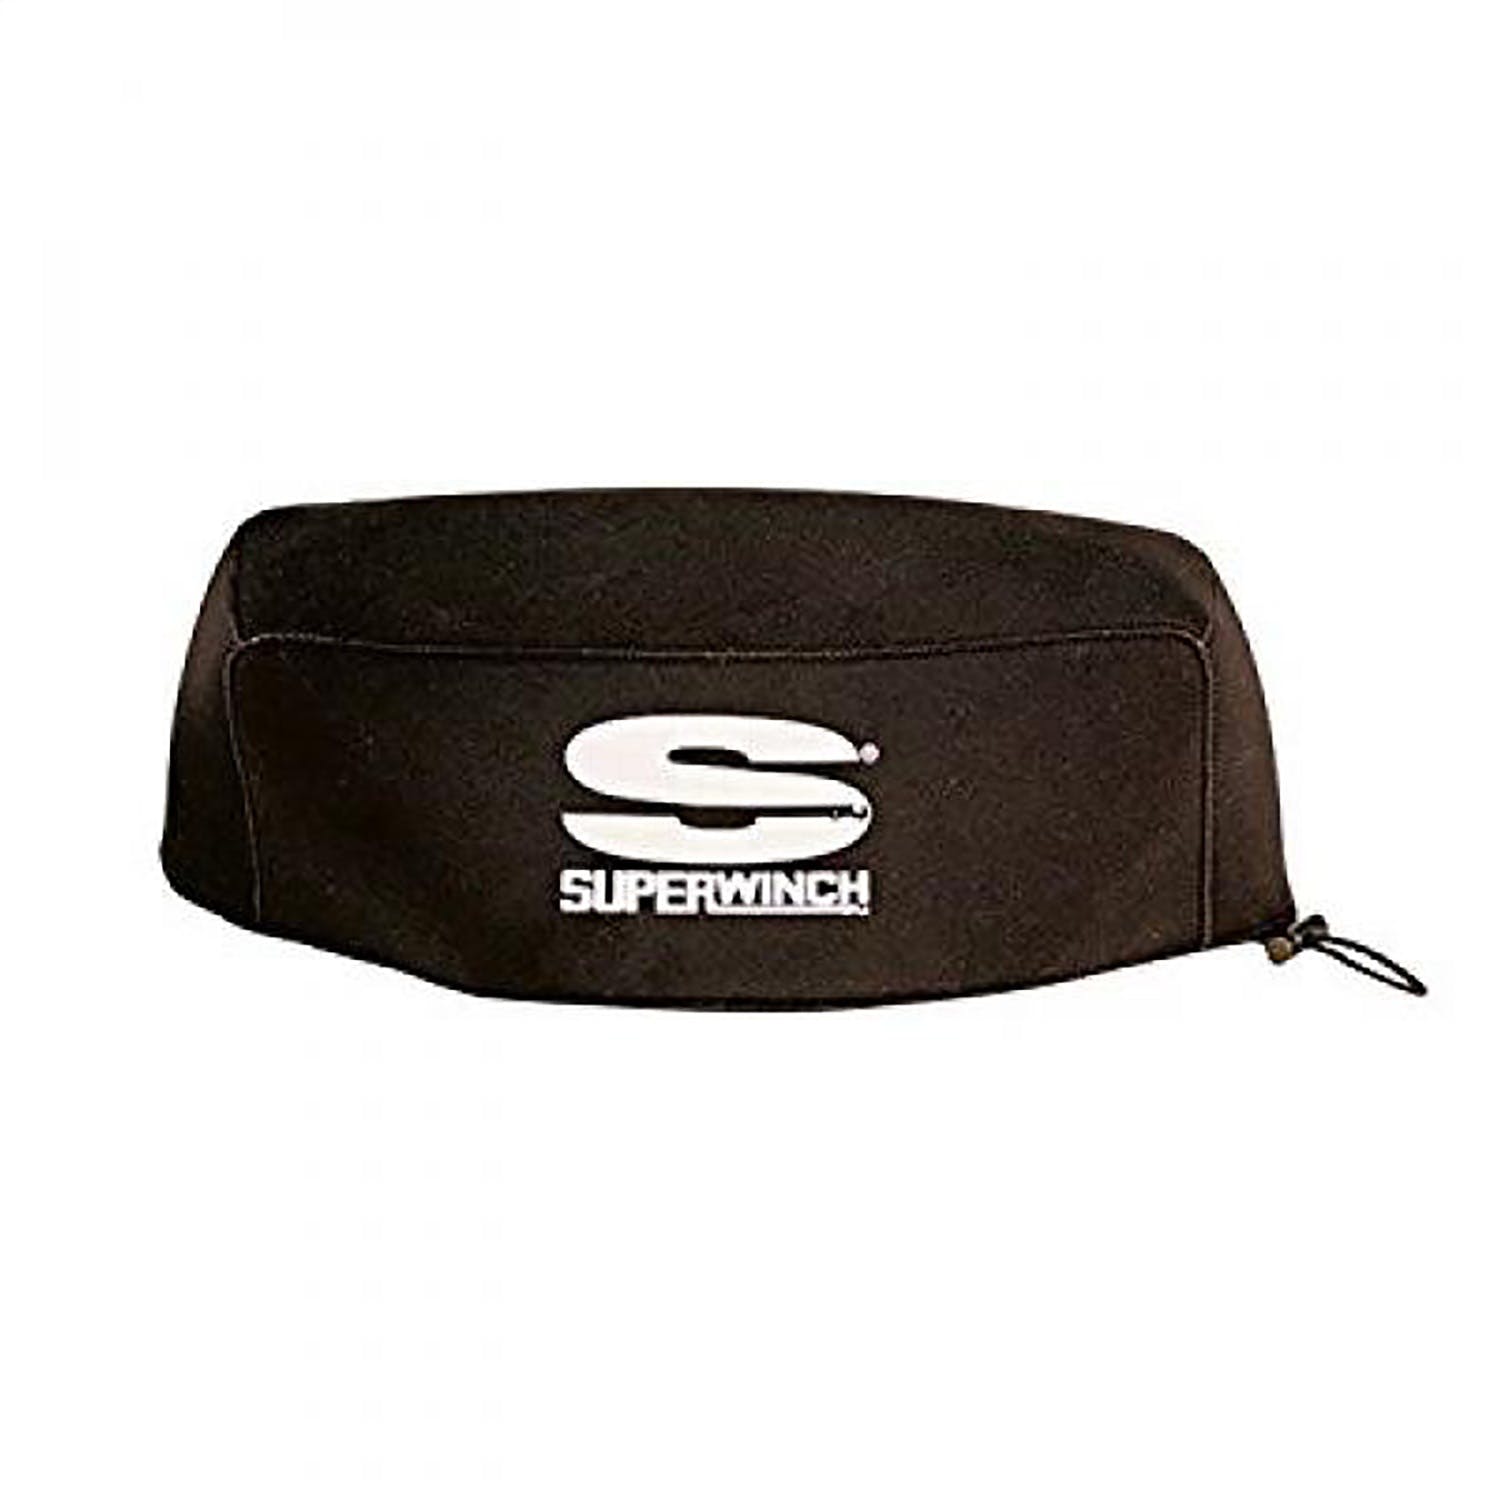 Superwinch 1572 Winch Cover